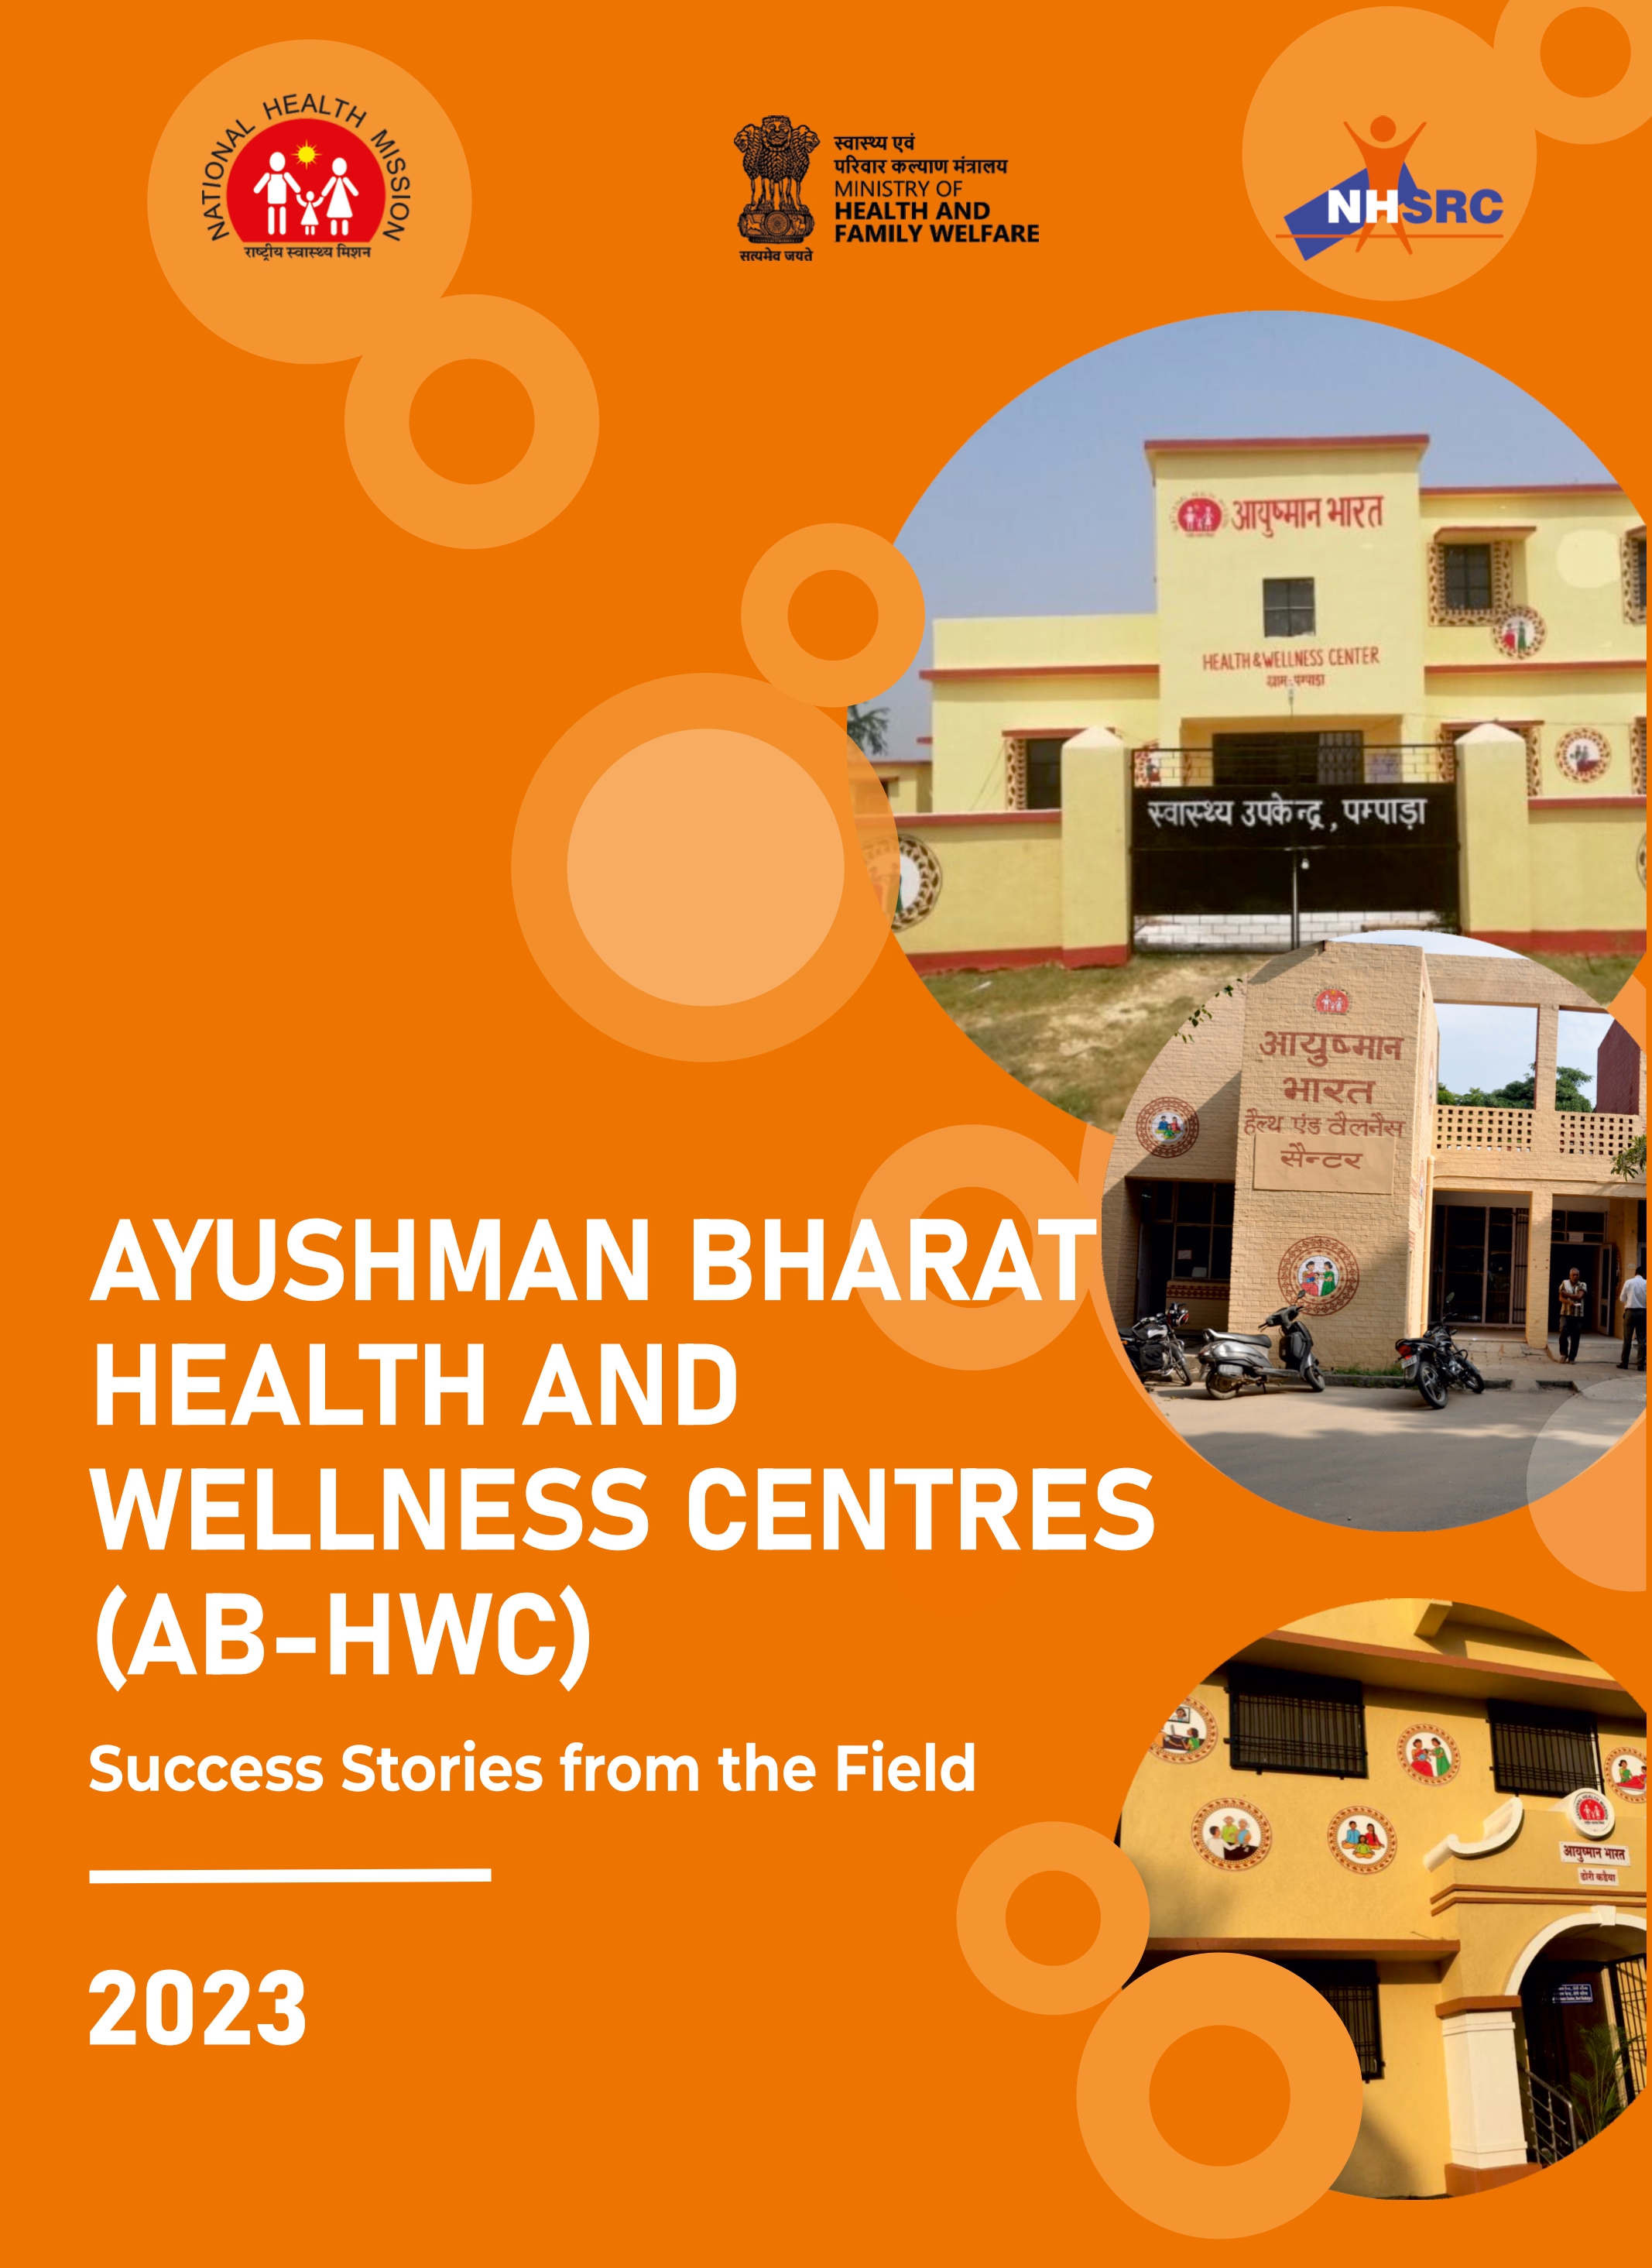 AB-HWC Success Story from the Field 2023